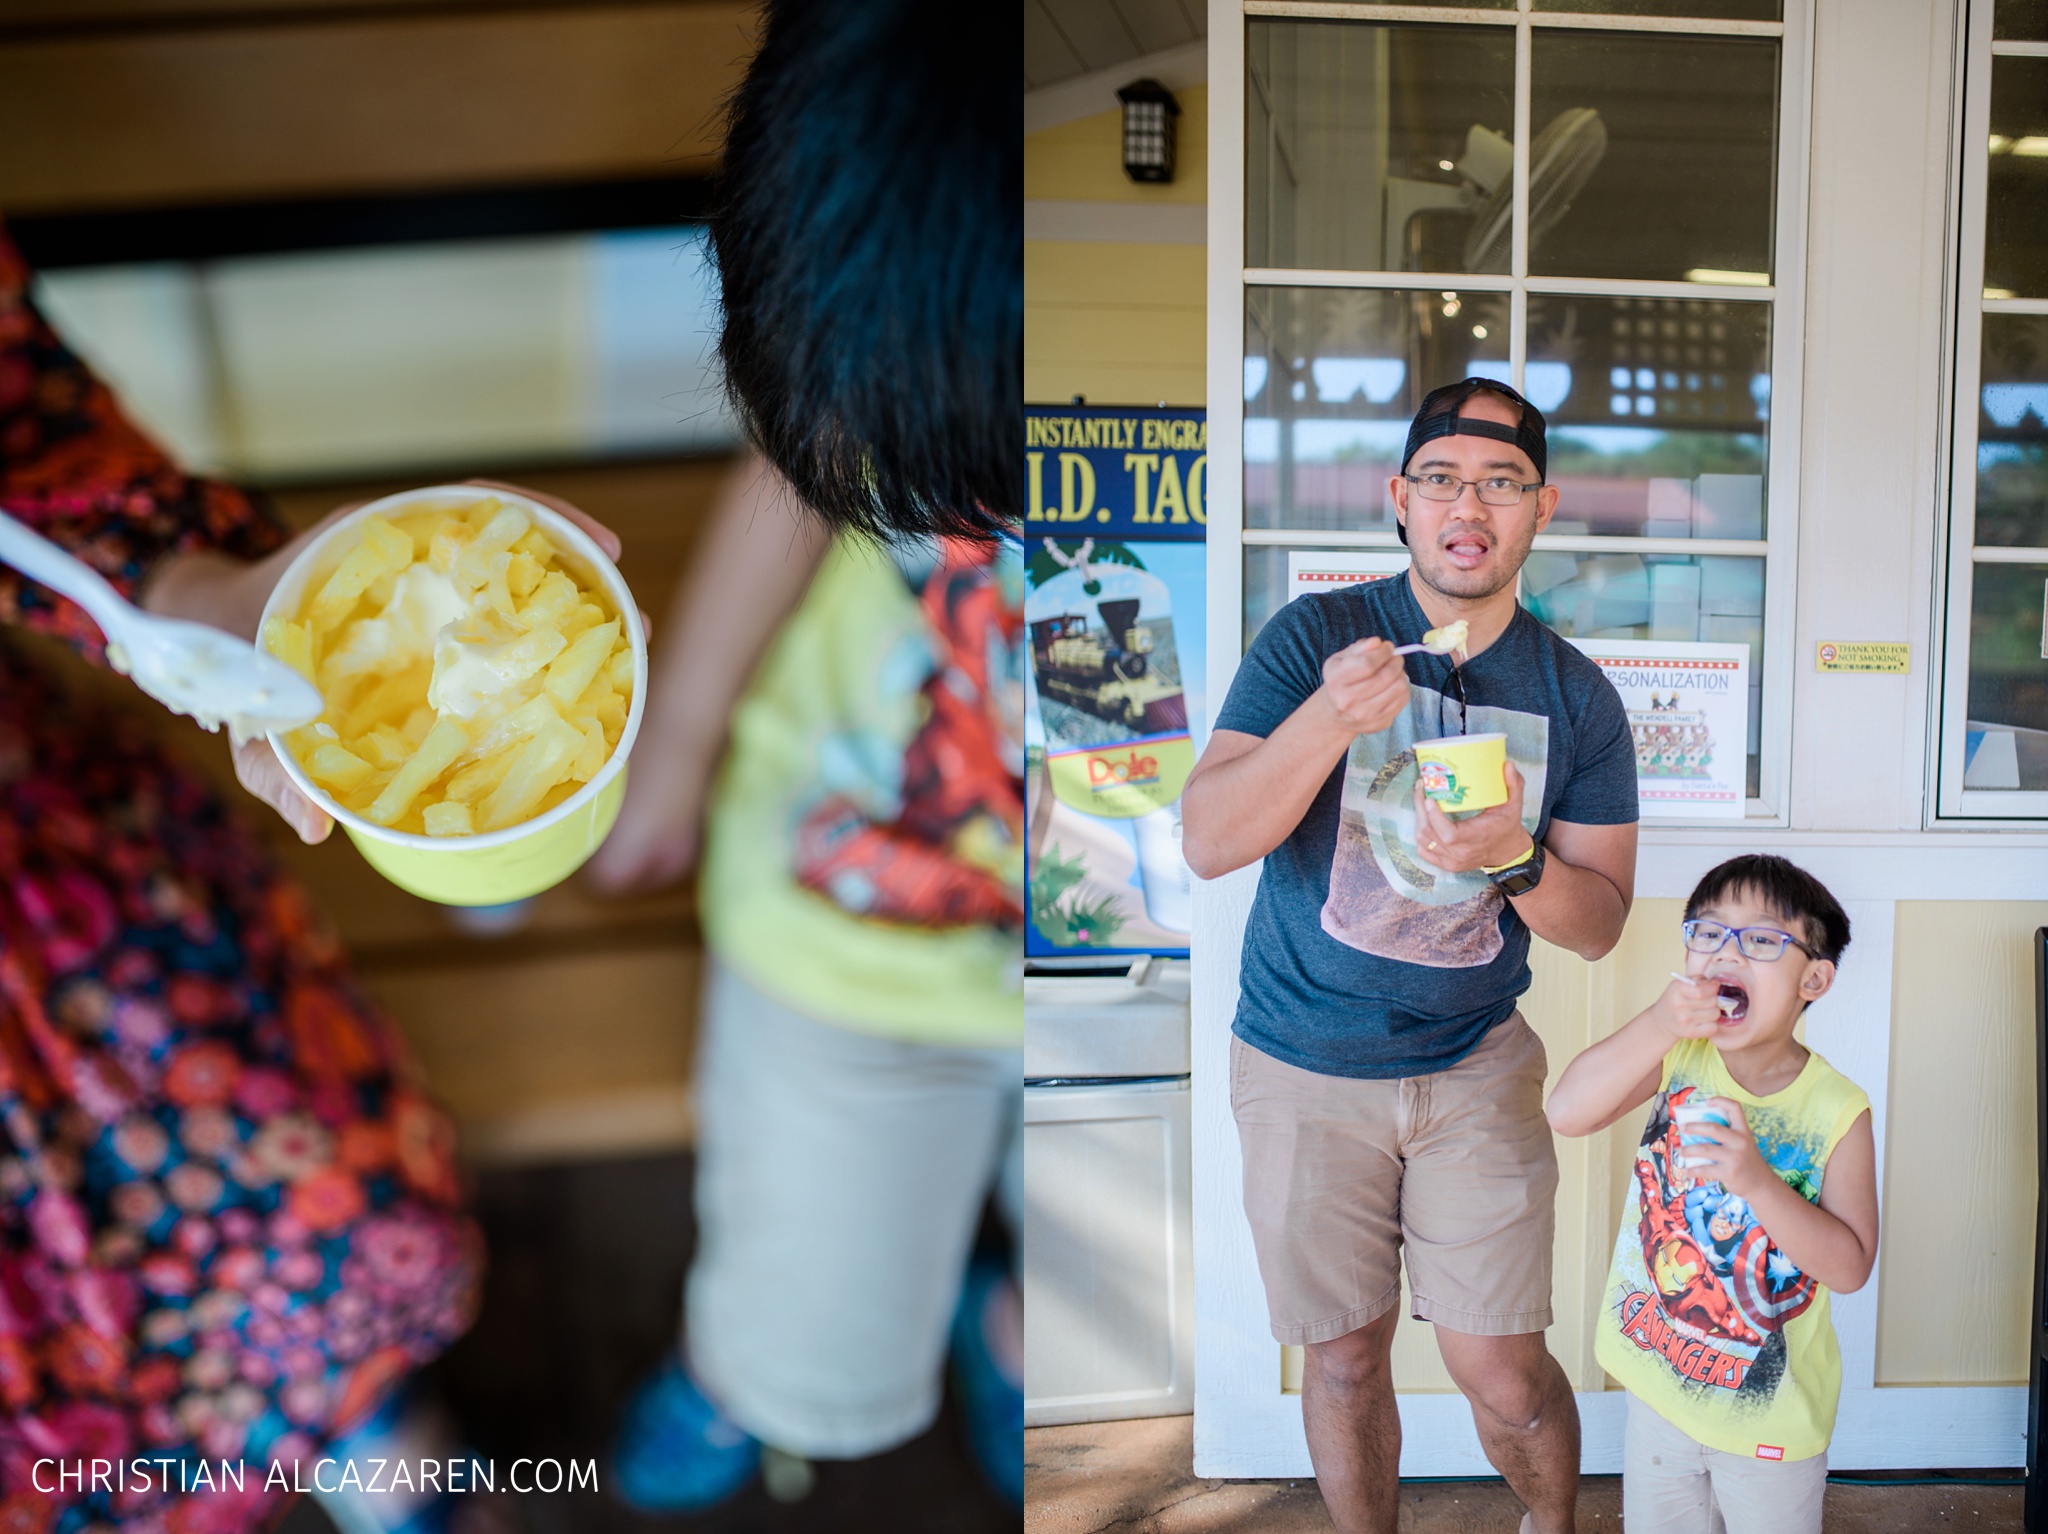  We are twinning when it comes to food trip. The pineapple whip was a fun experience 